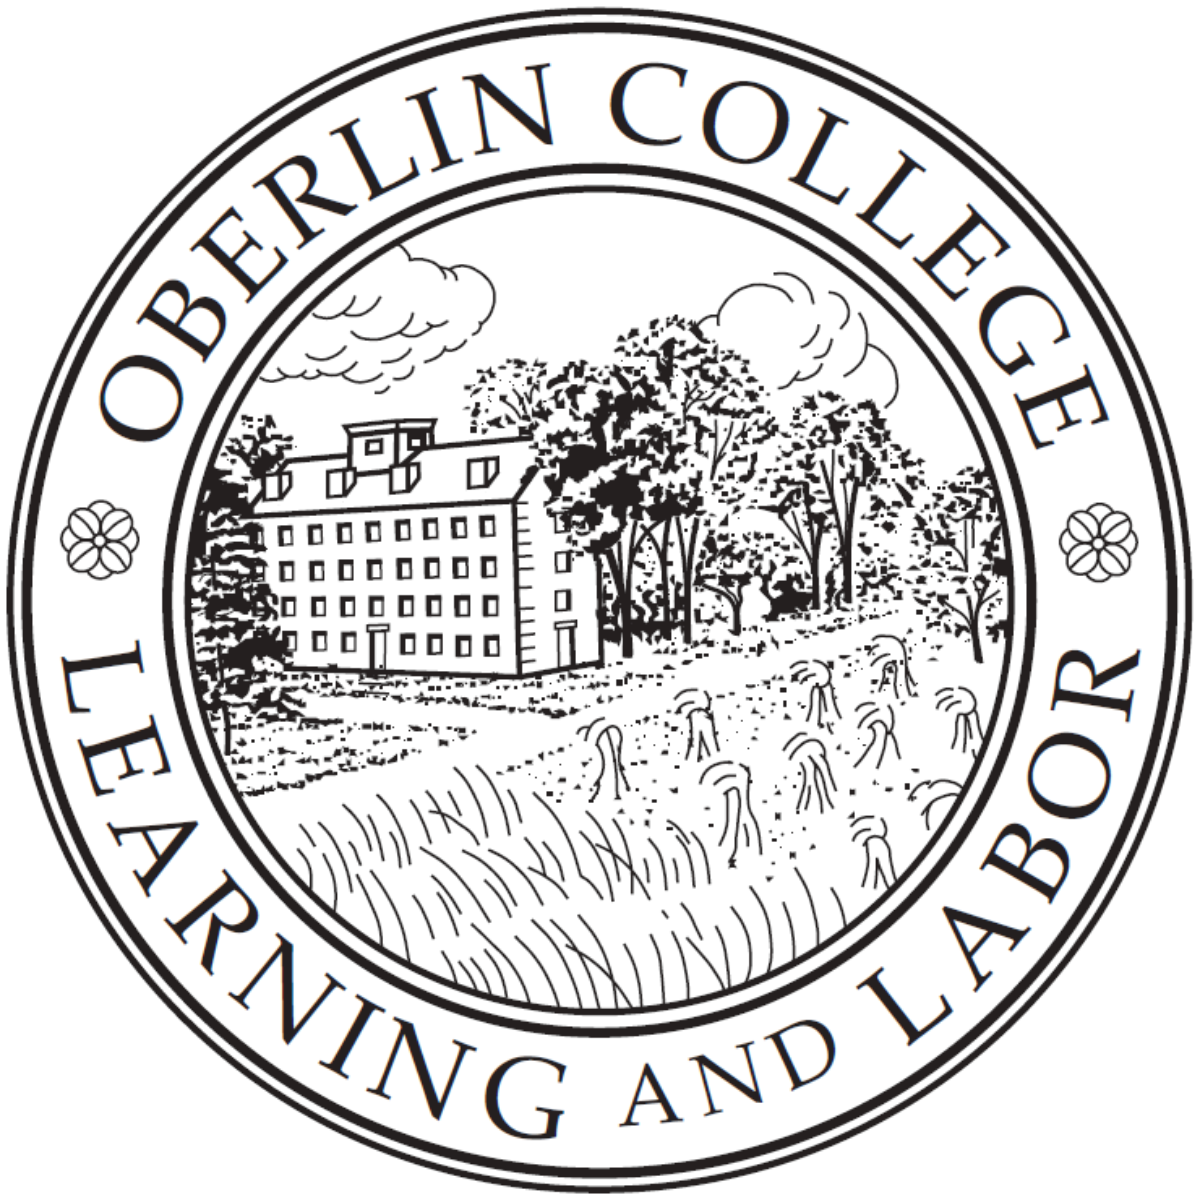 A logo of Oberlin College for our school profile